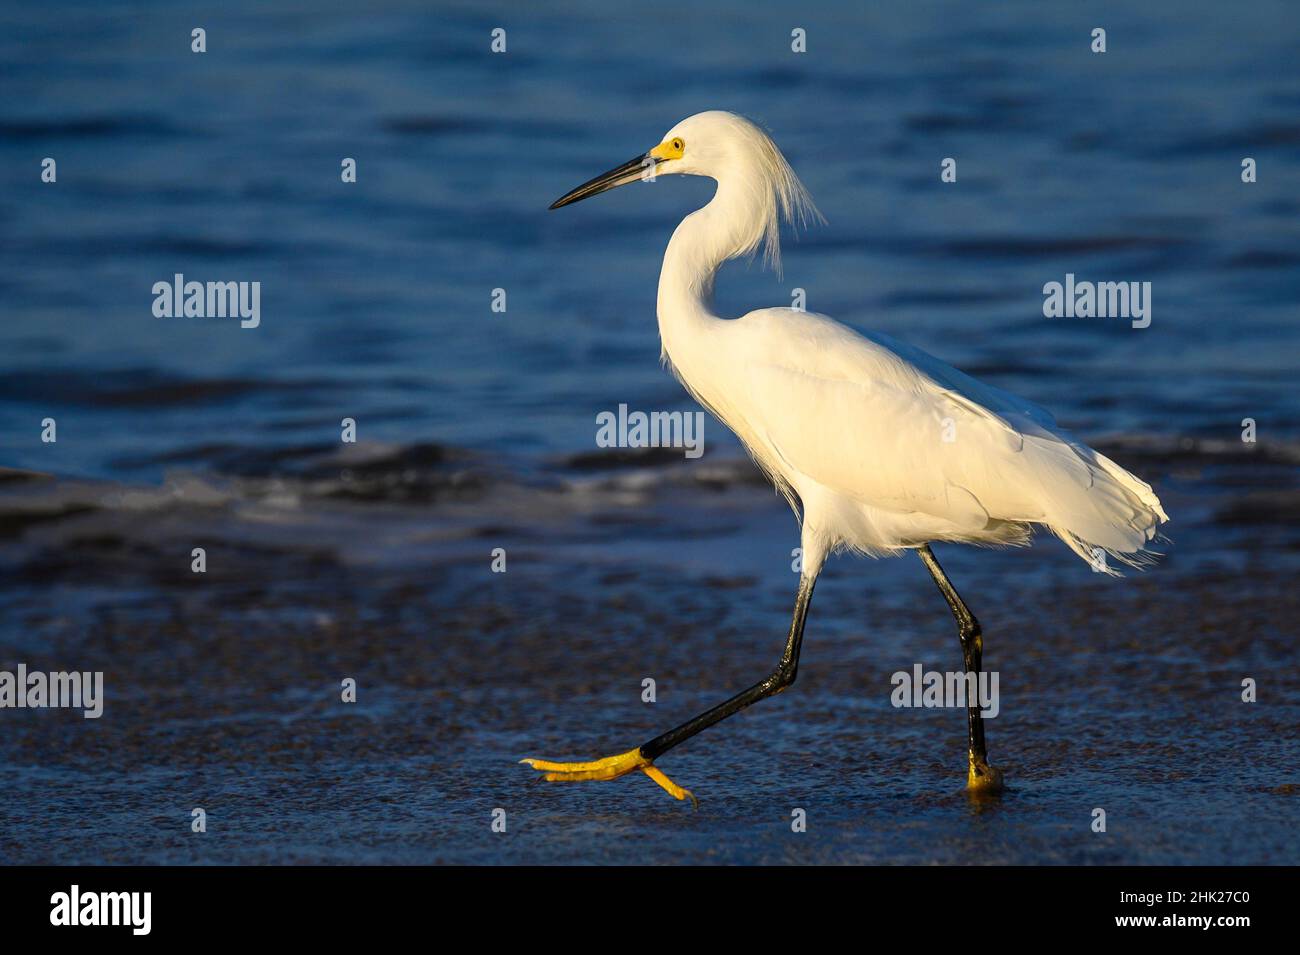 A Snowy Egret in the tidal zone on the beach at Chacala, Nayarit, Mexico. Stock Photo